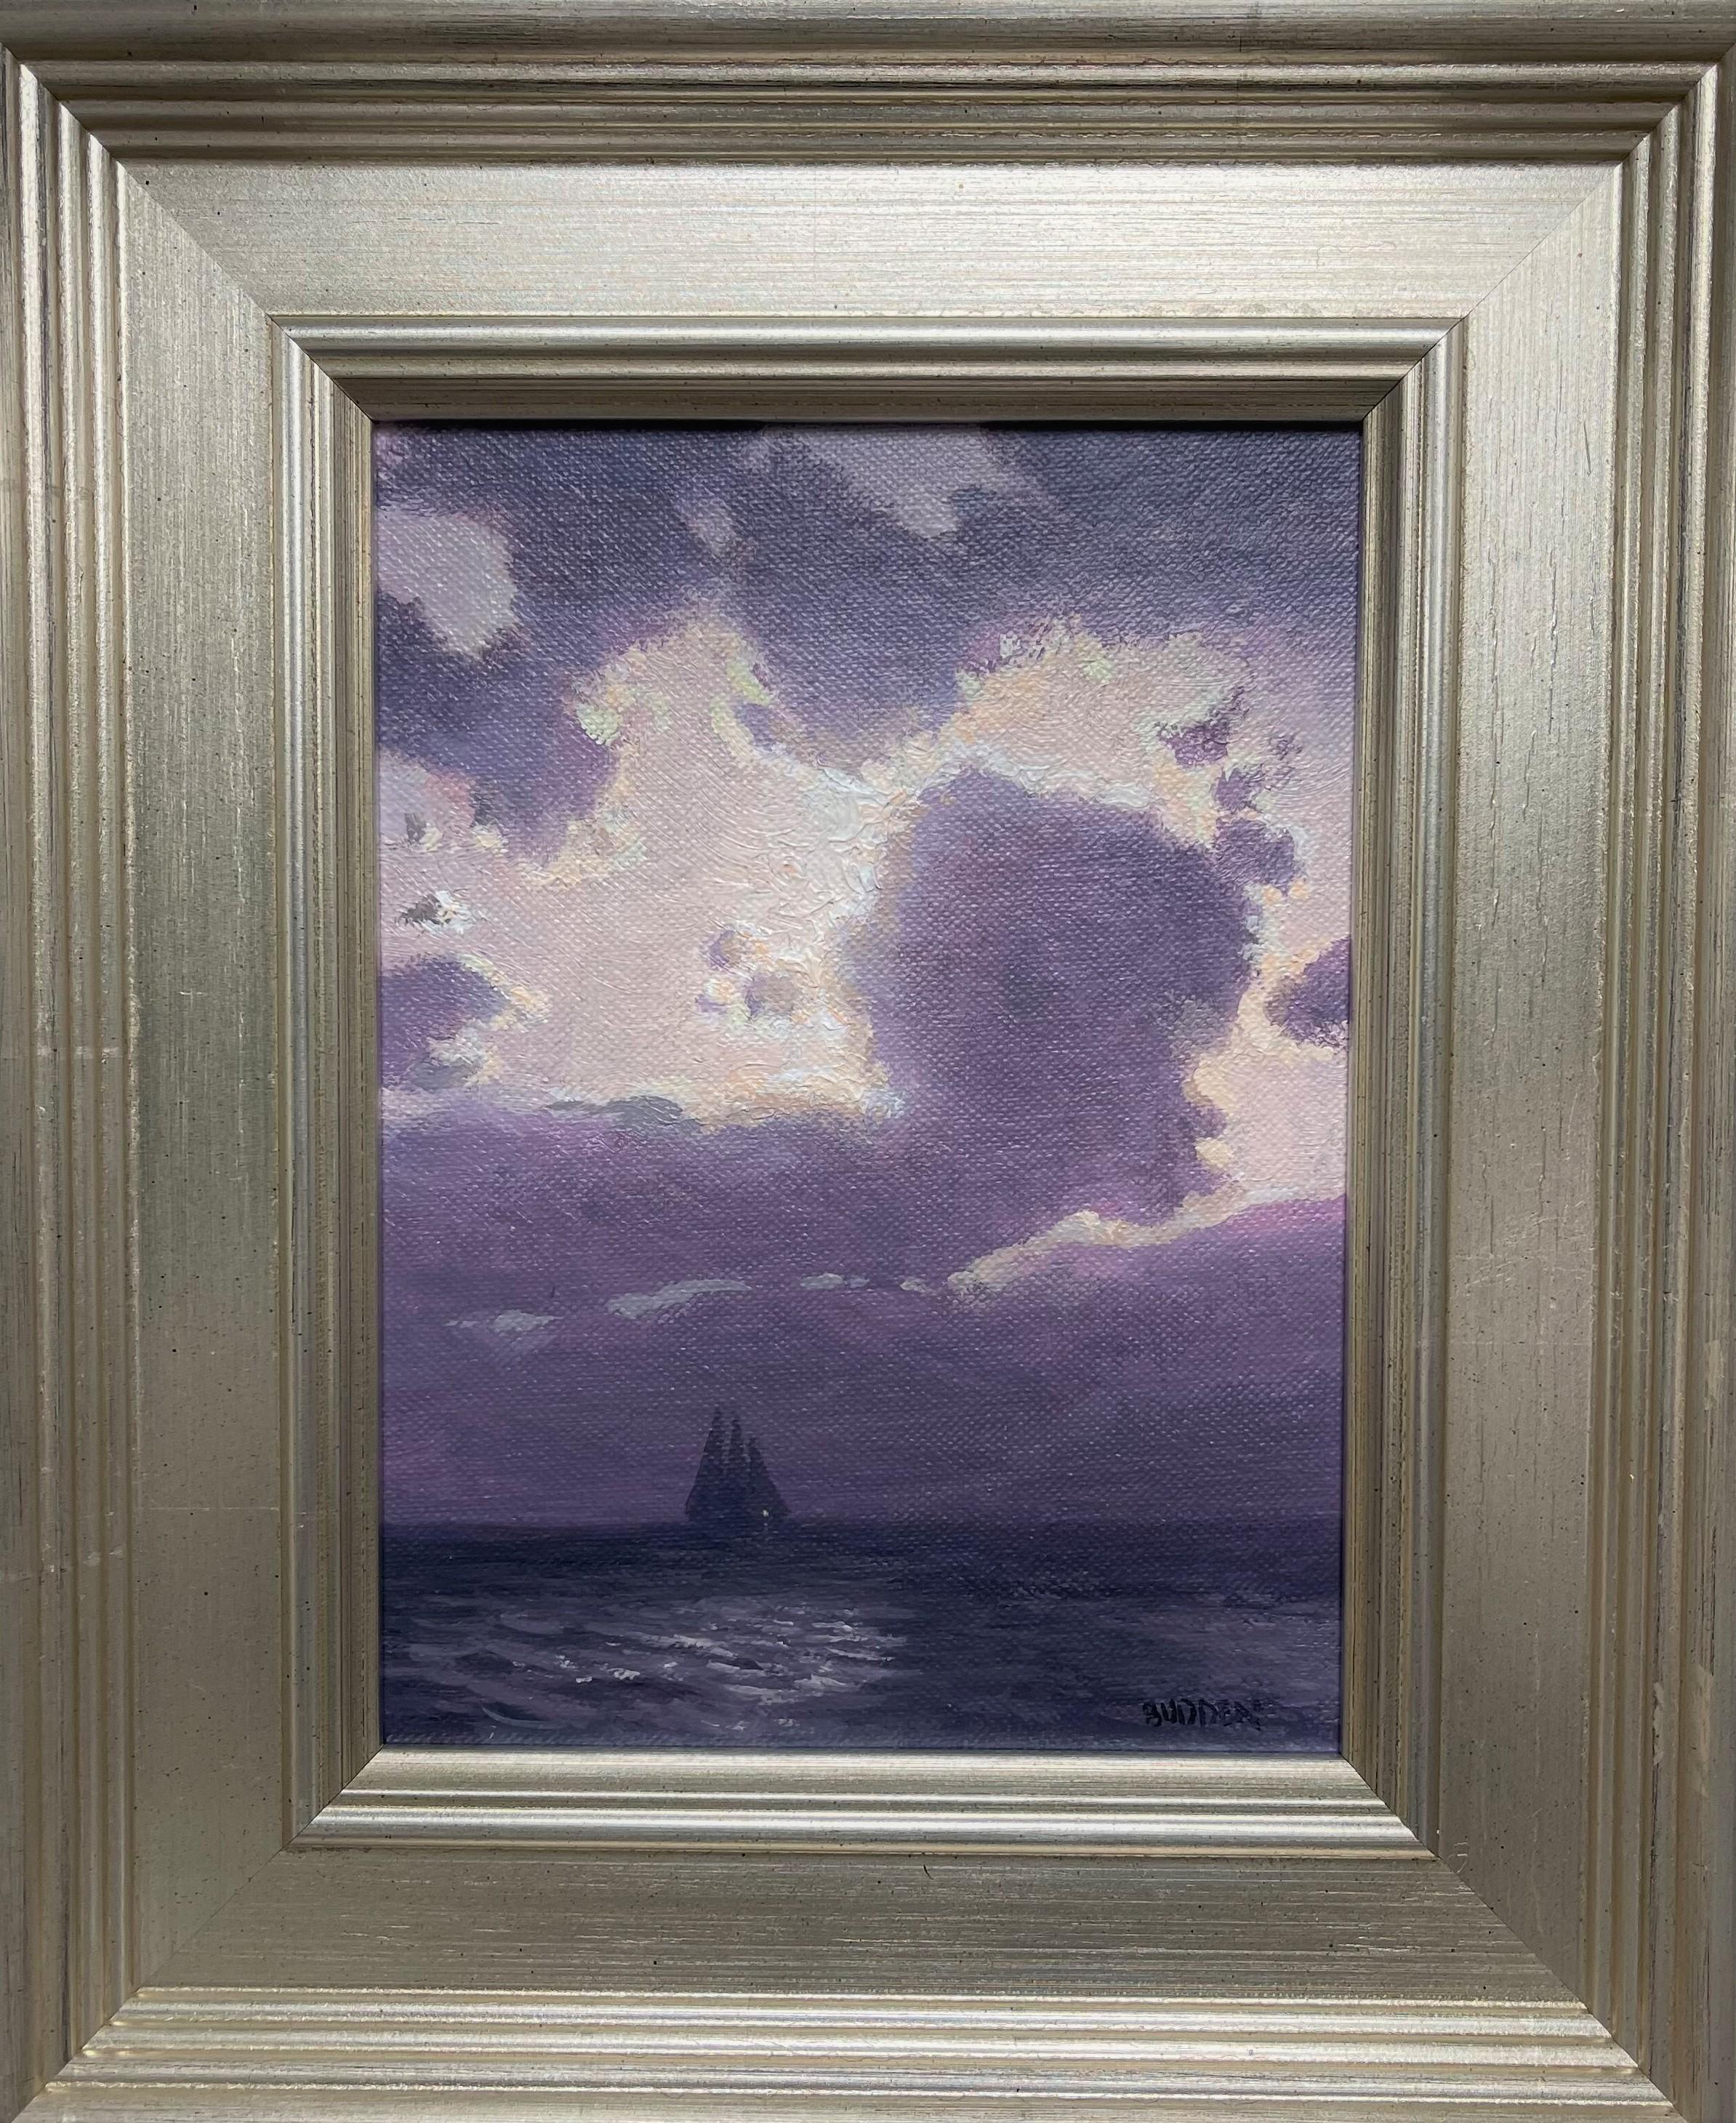  Moonrise  Sailing Iviolet) oil/panel 6 x 8 image
 Moonrise Sailing is an oil painting on canvas panel by award winning contemporary artist Michael Budden that showcases a uniquely beautiful moonlit view of the ocean. This painting is part of a